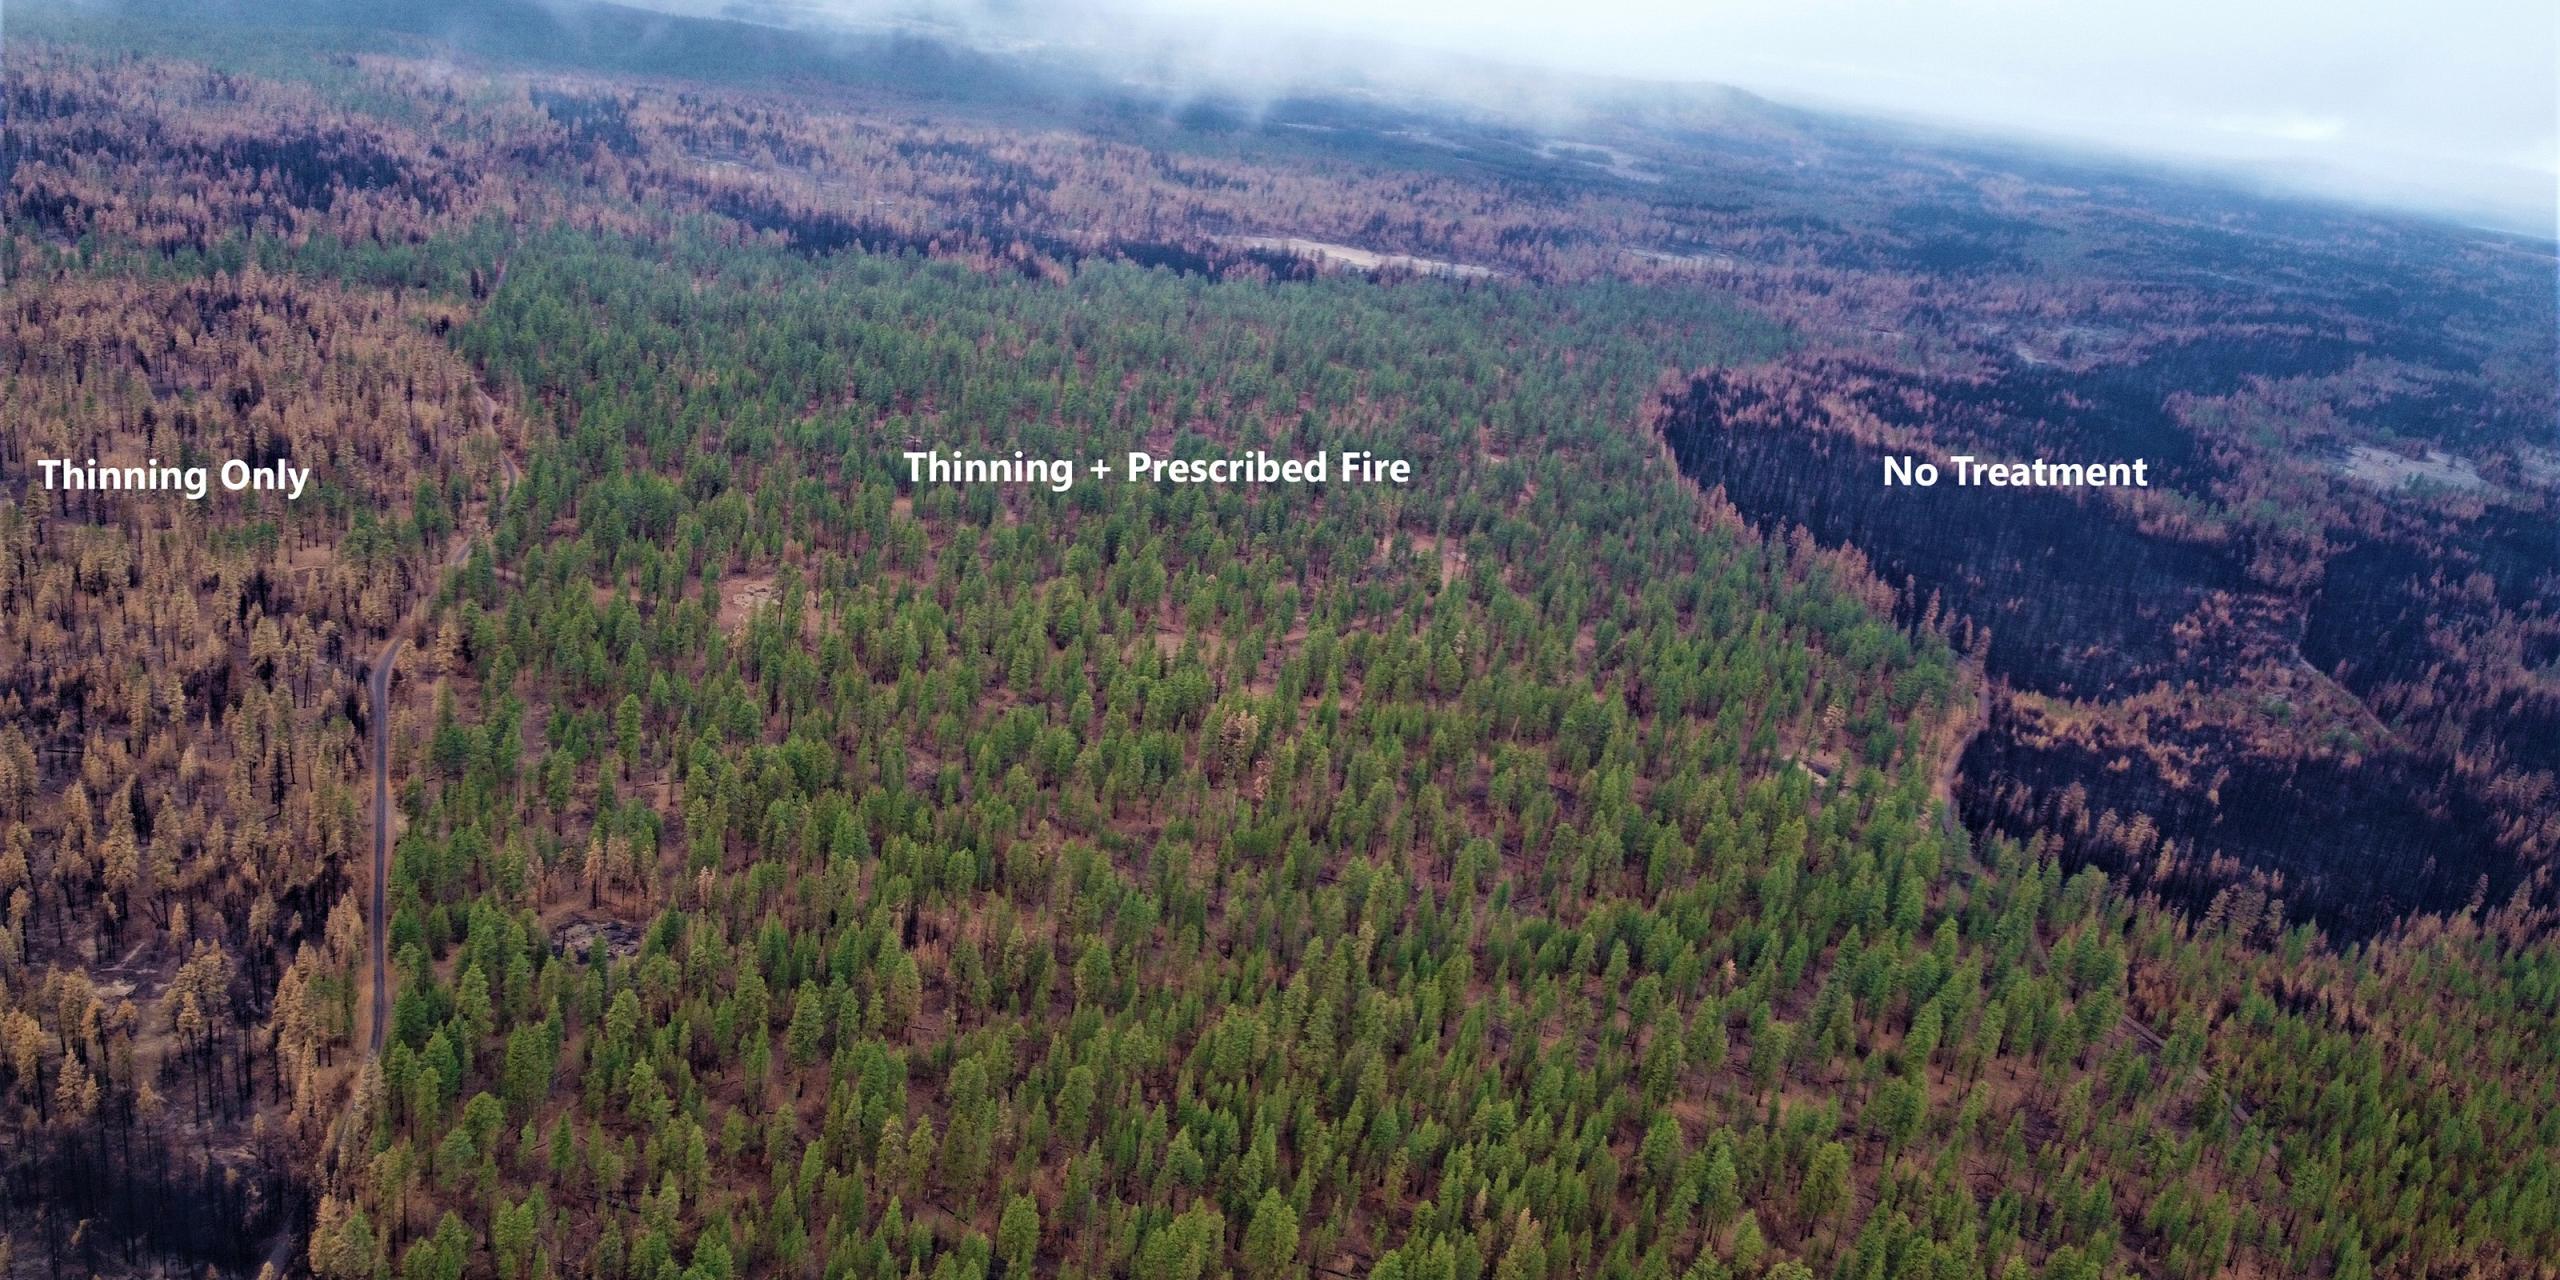 A photo of the forest burned by the Bootleg Fire